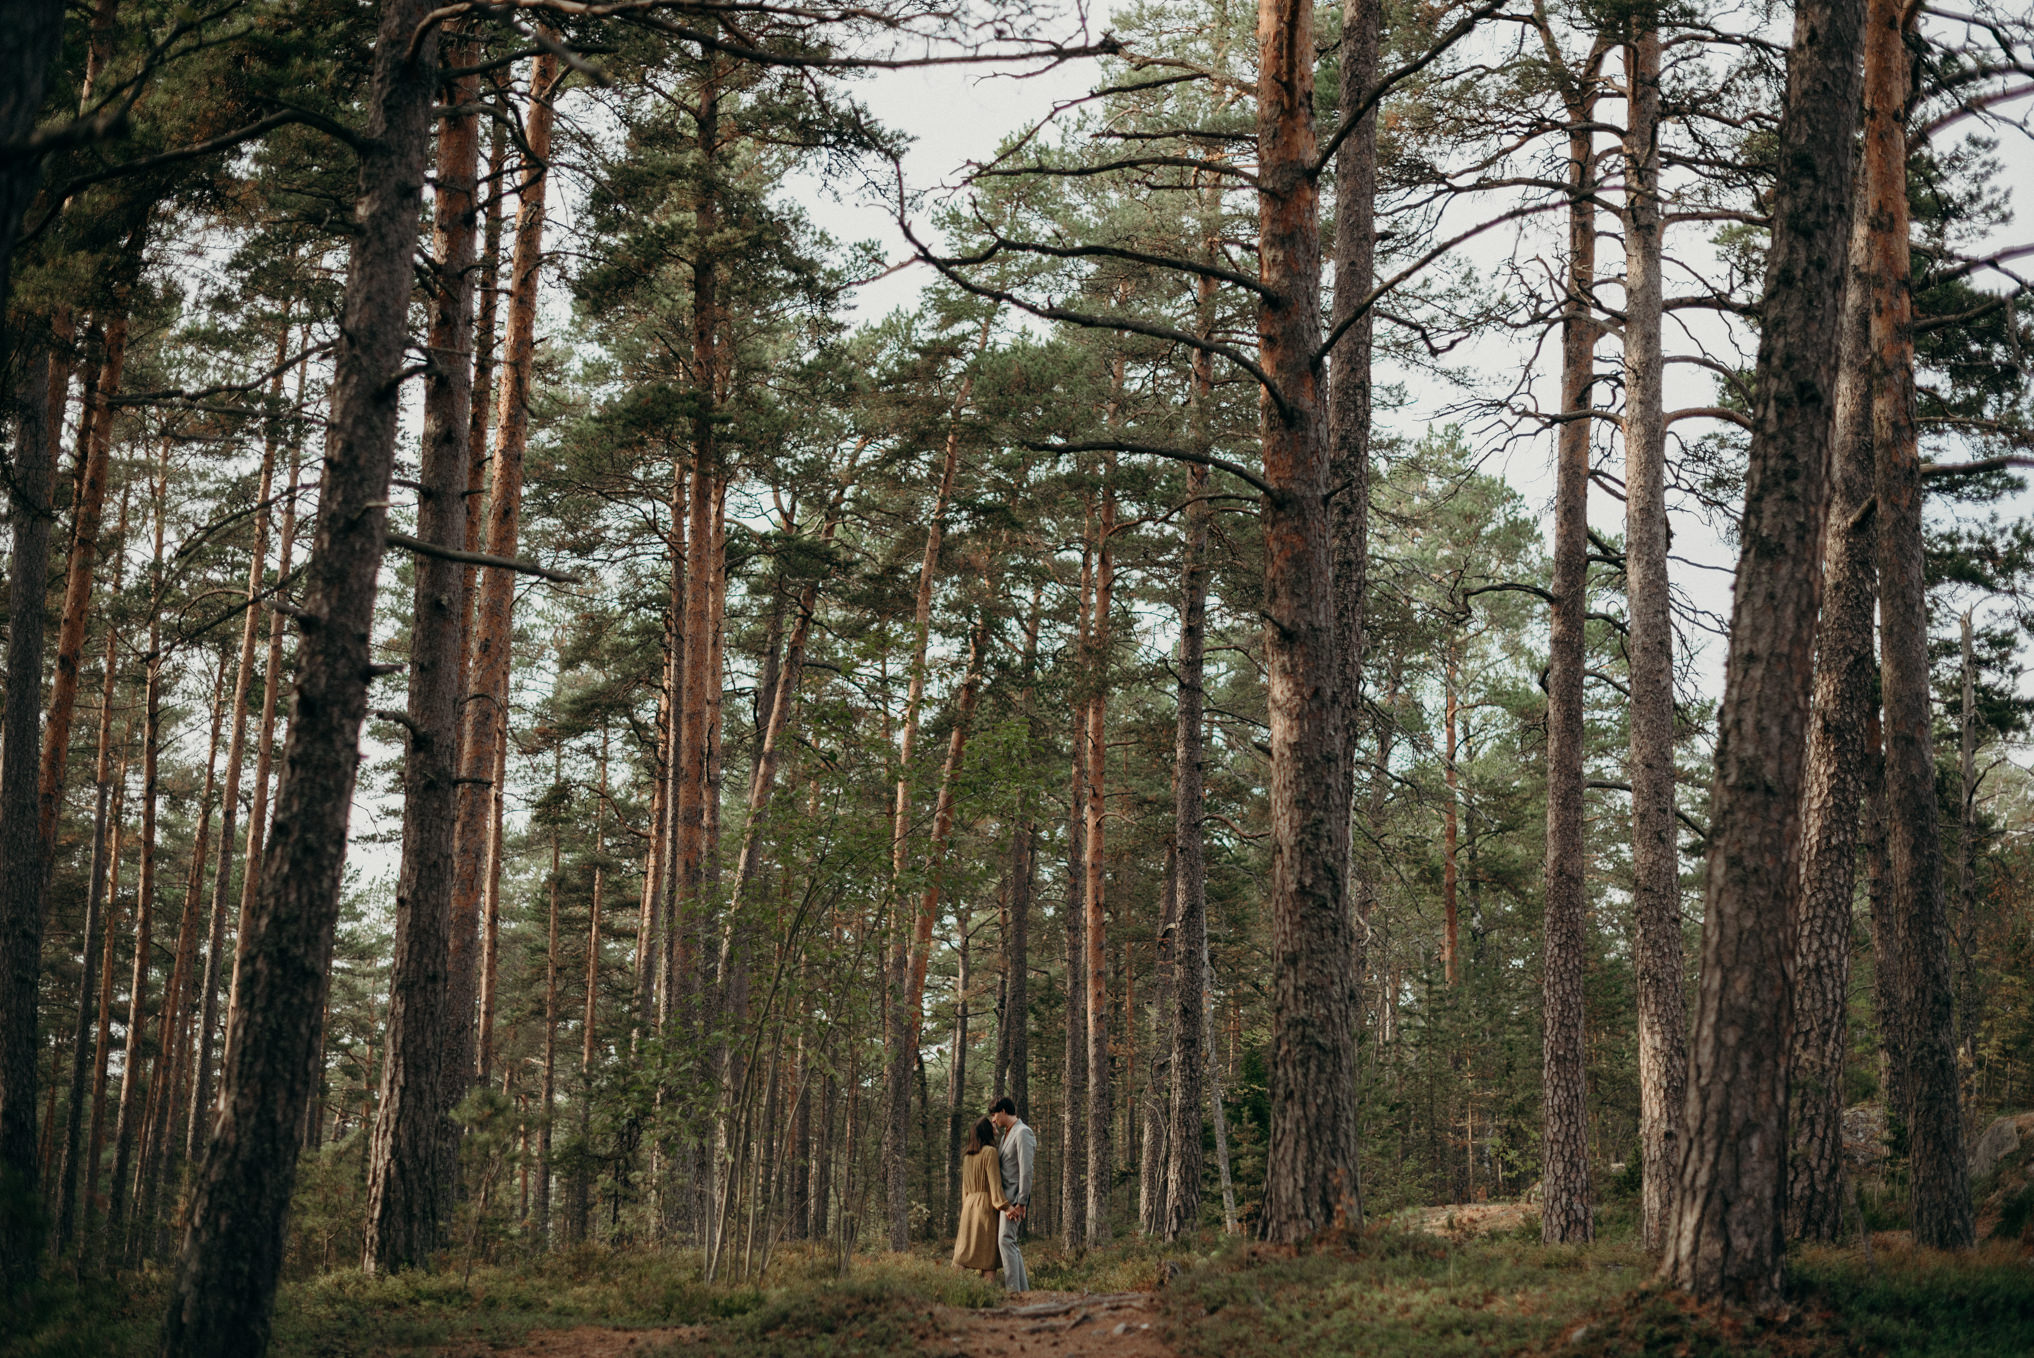 Couple in forest full of pine trees in Finland